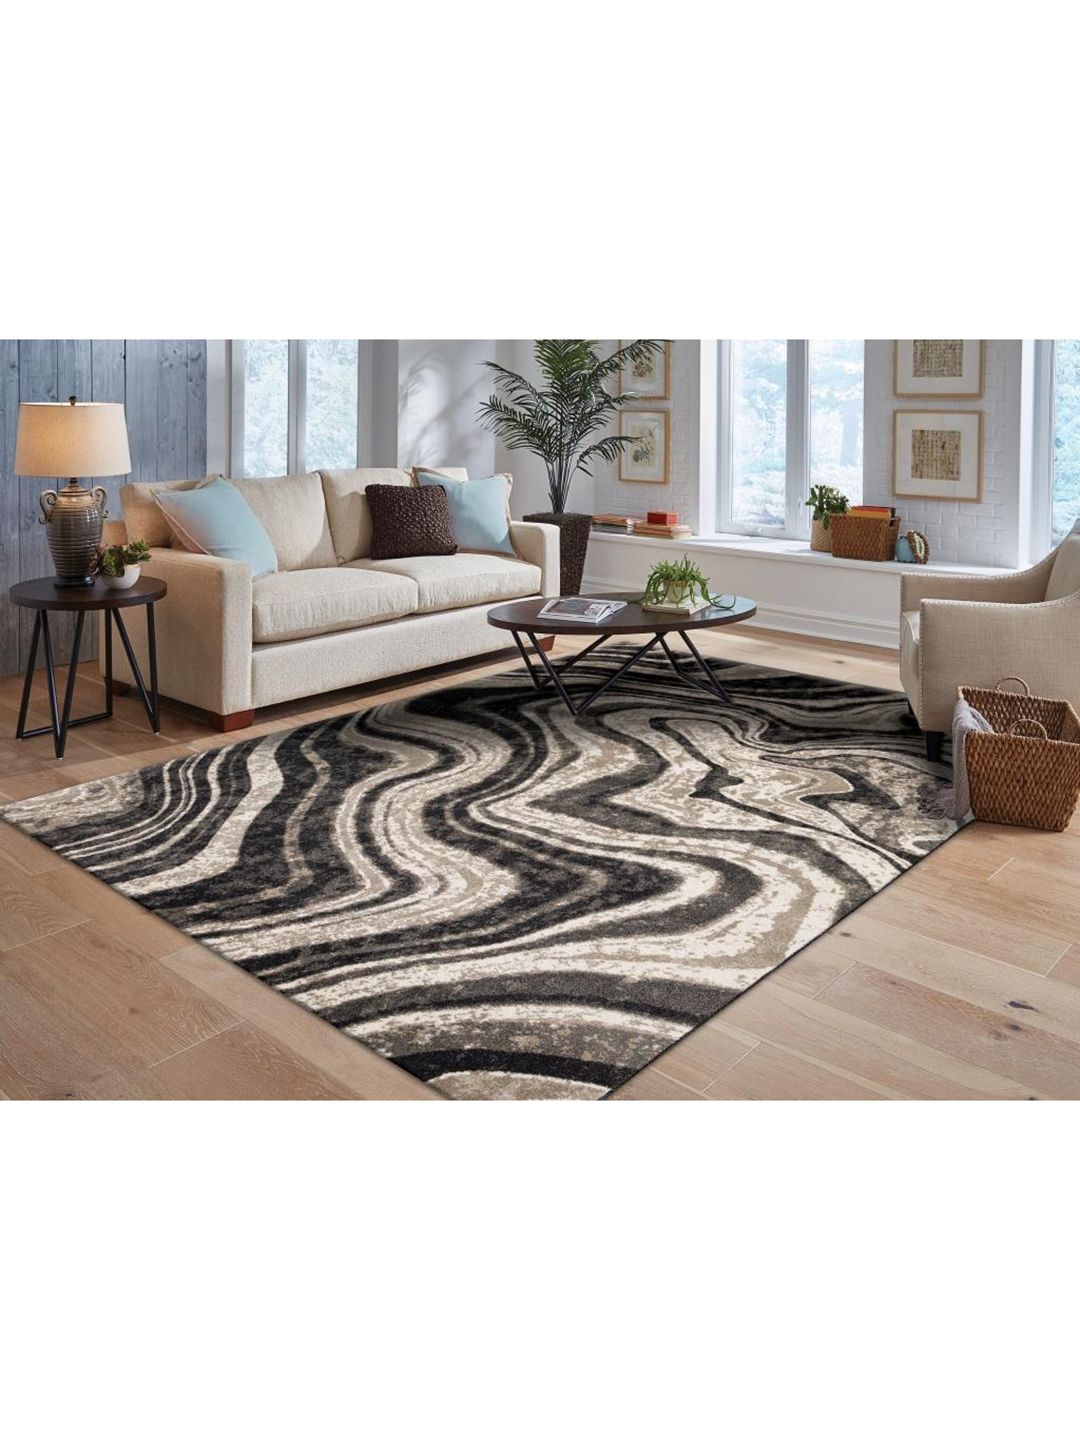 Ddecor Grey Abstract Carpet Price in India